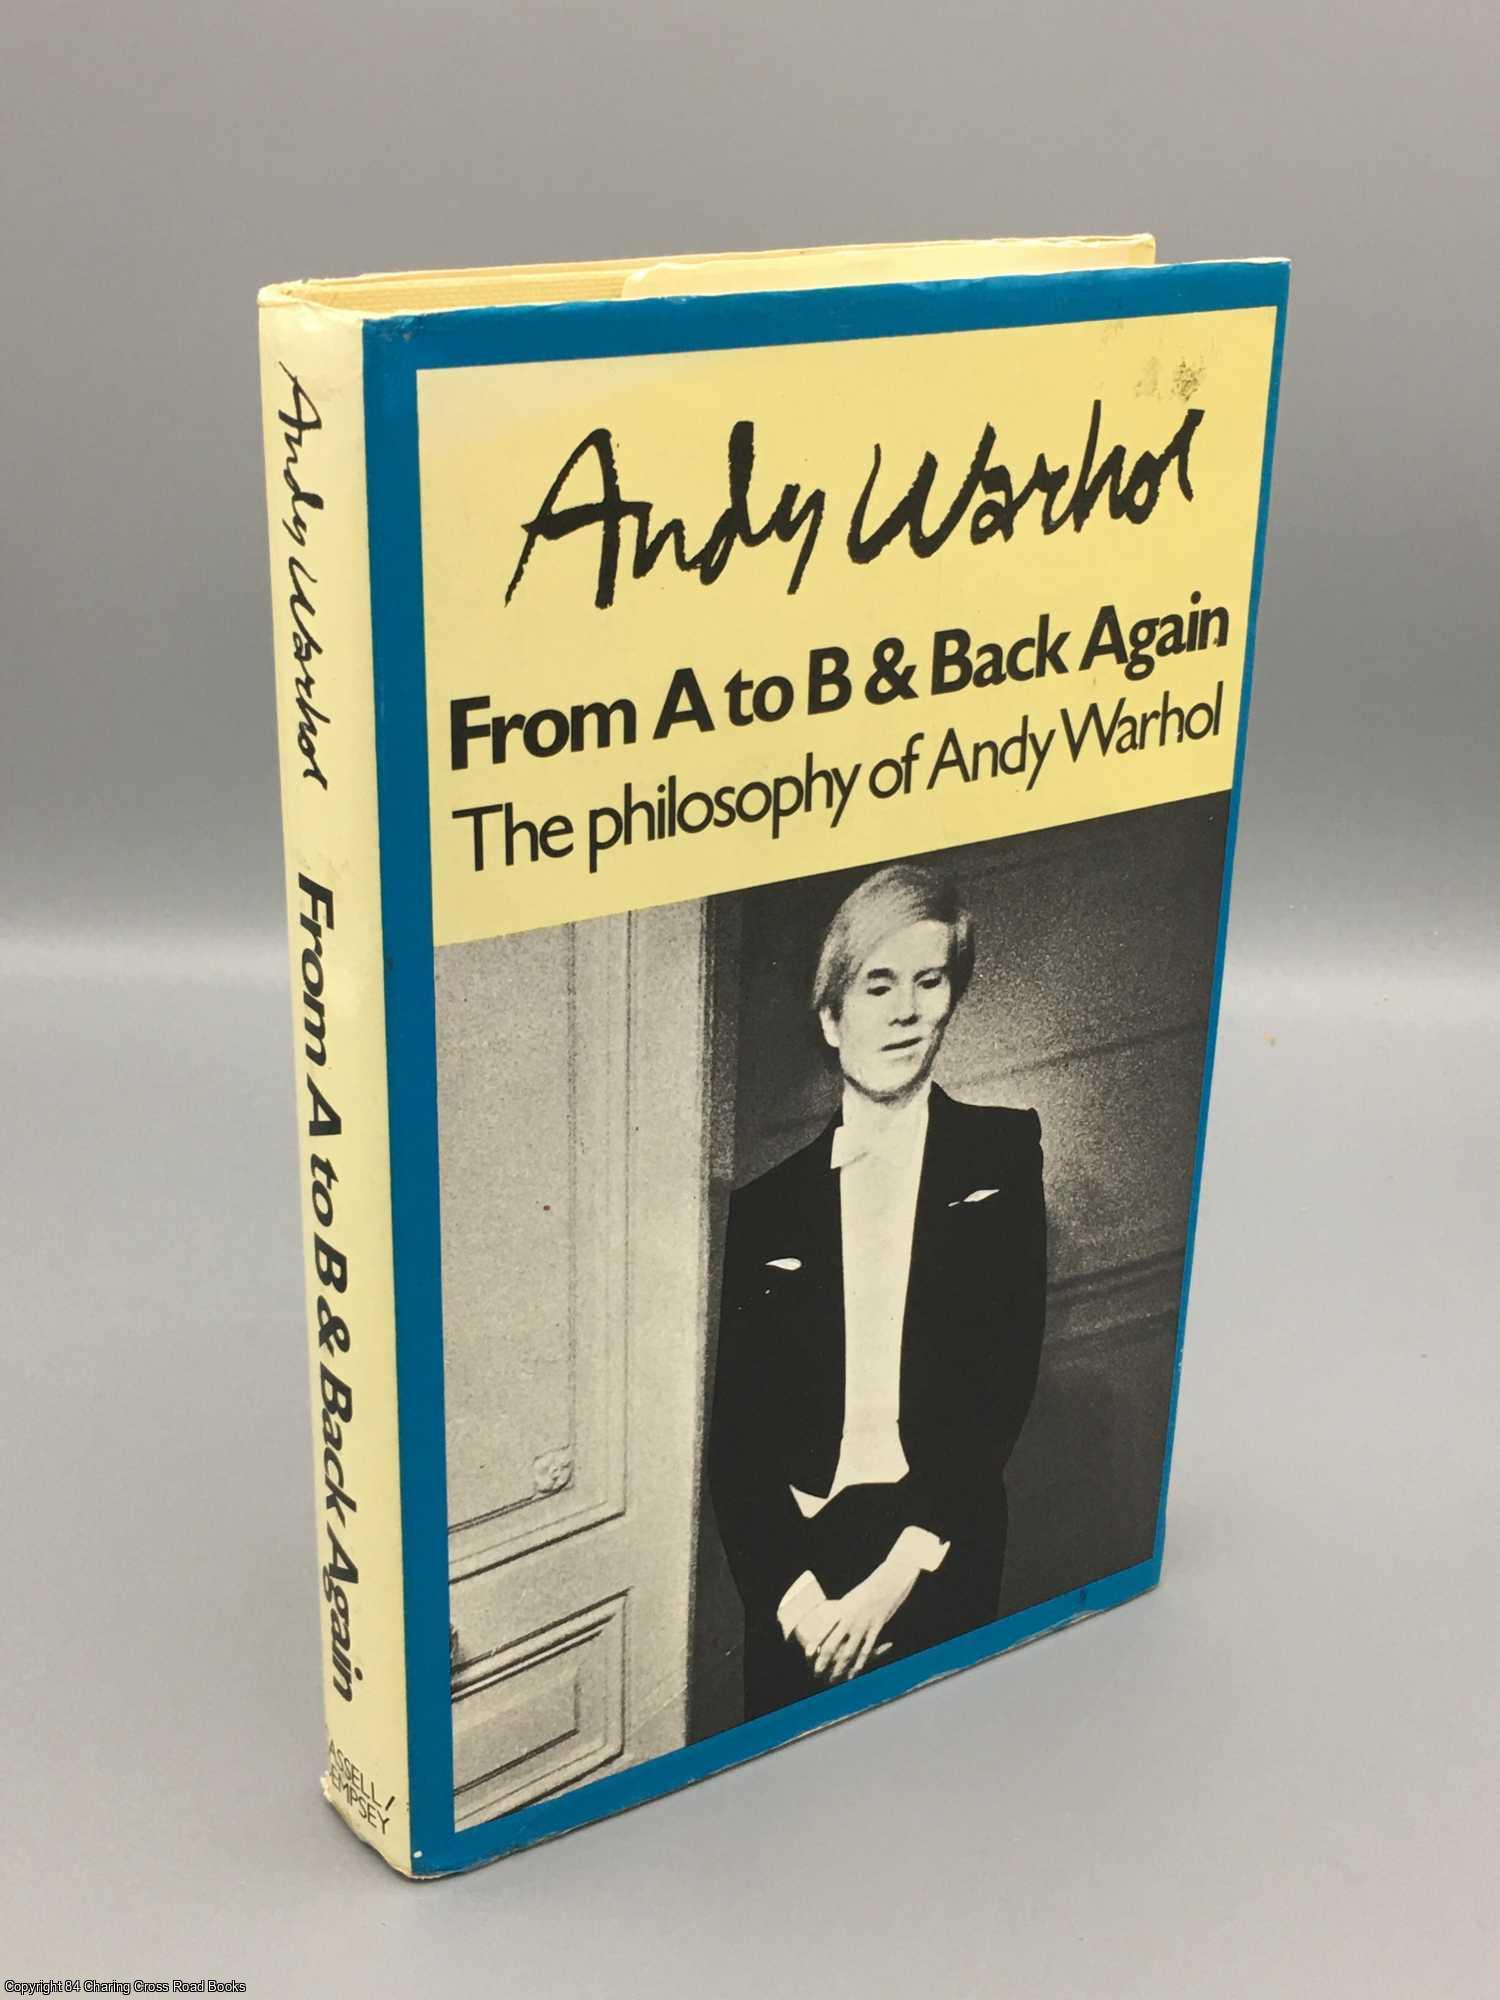 Warhol, Andy - The Philosophy of Andy Warhol